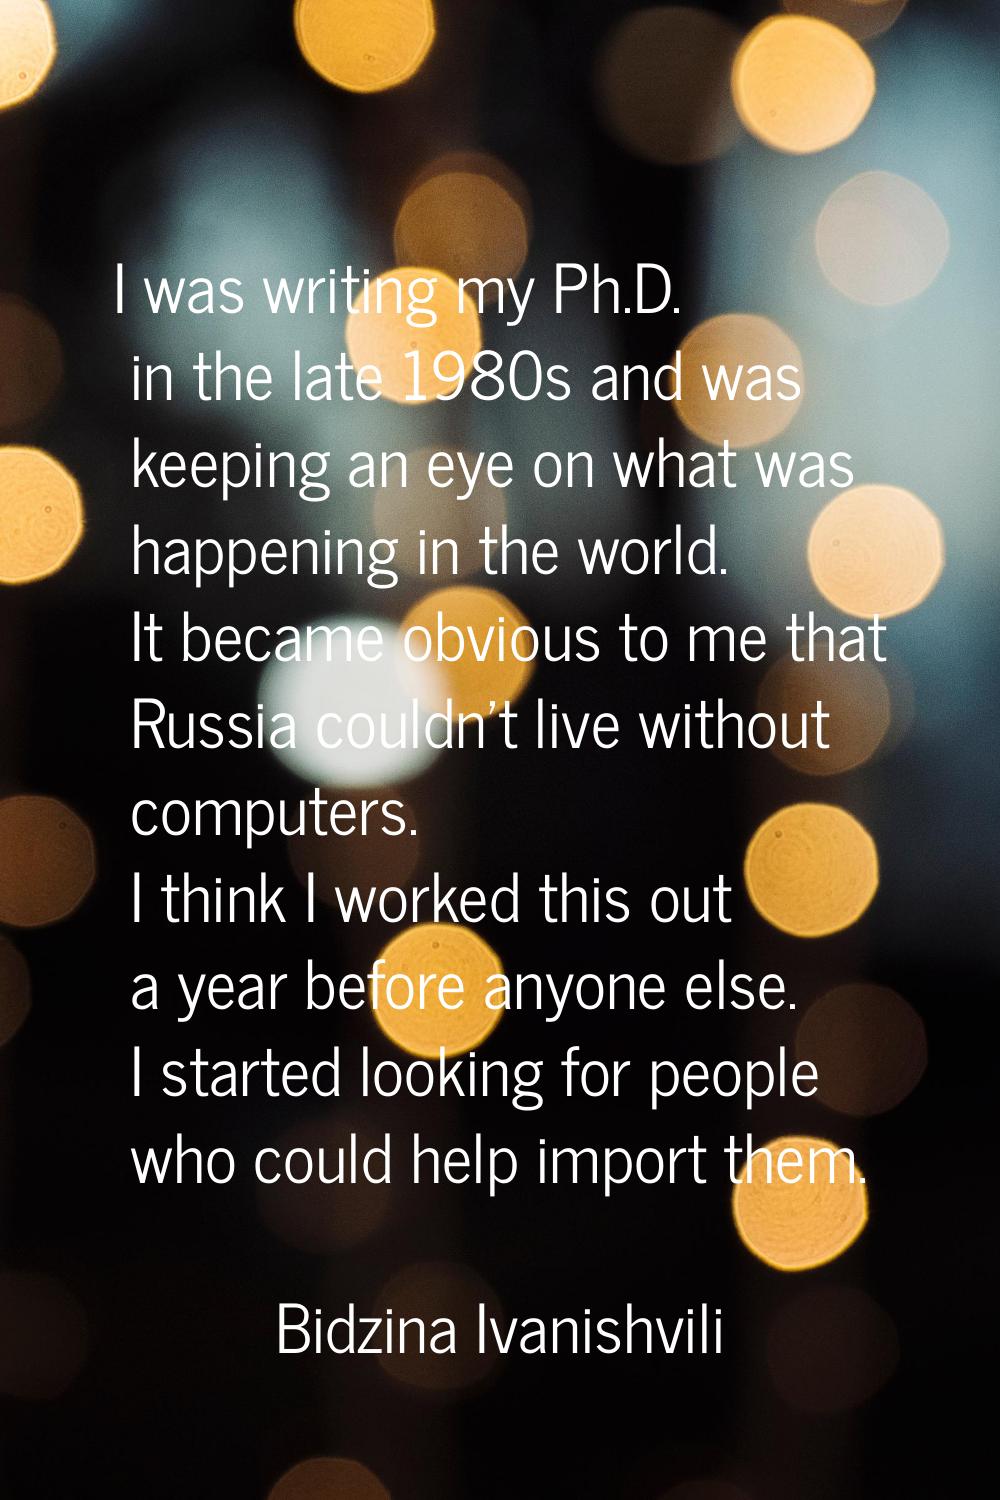 I was writing my Ph.D. in the late 1980s and was keeping an eye on what was happening in the world.